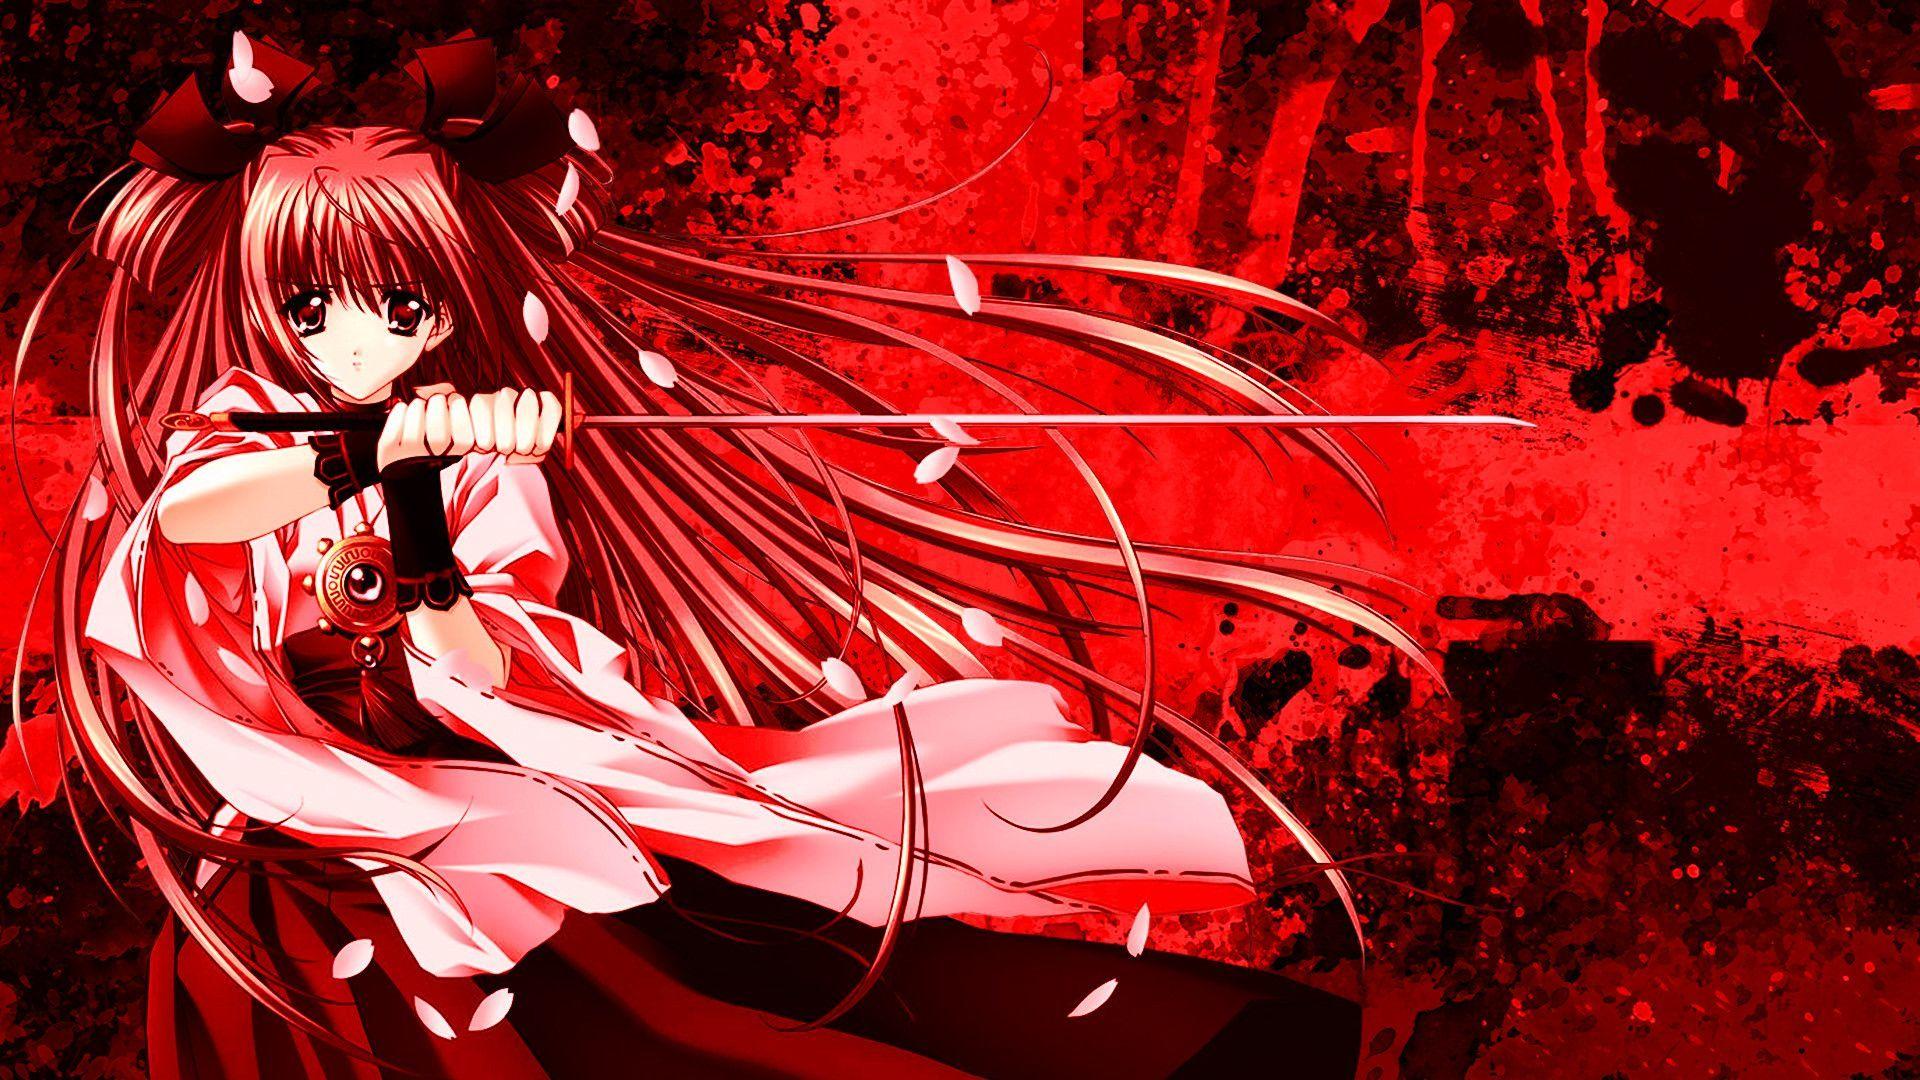 Black and Red Anime Wallpapers - Top Free Black and Red ...